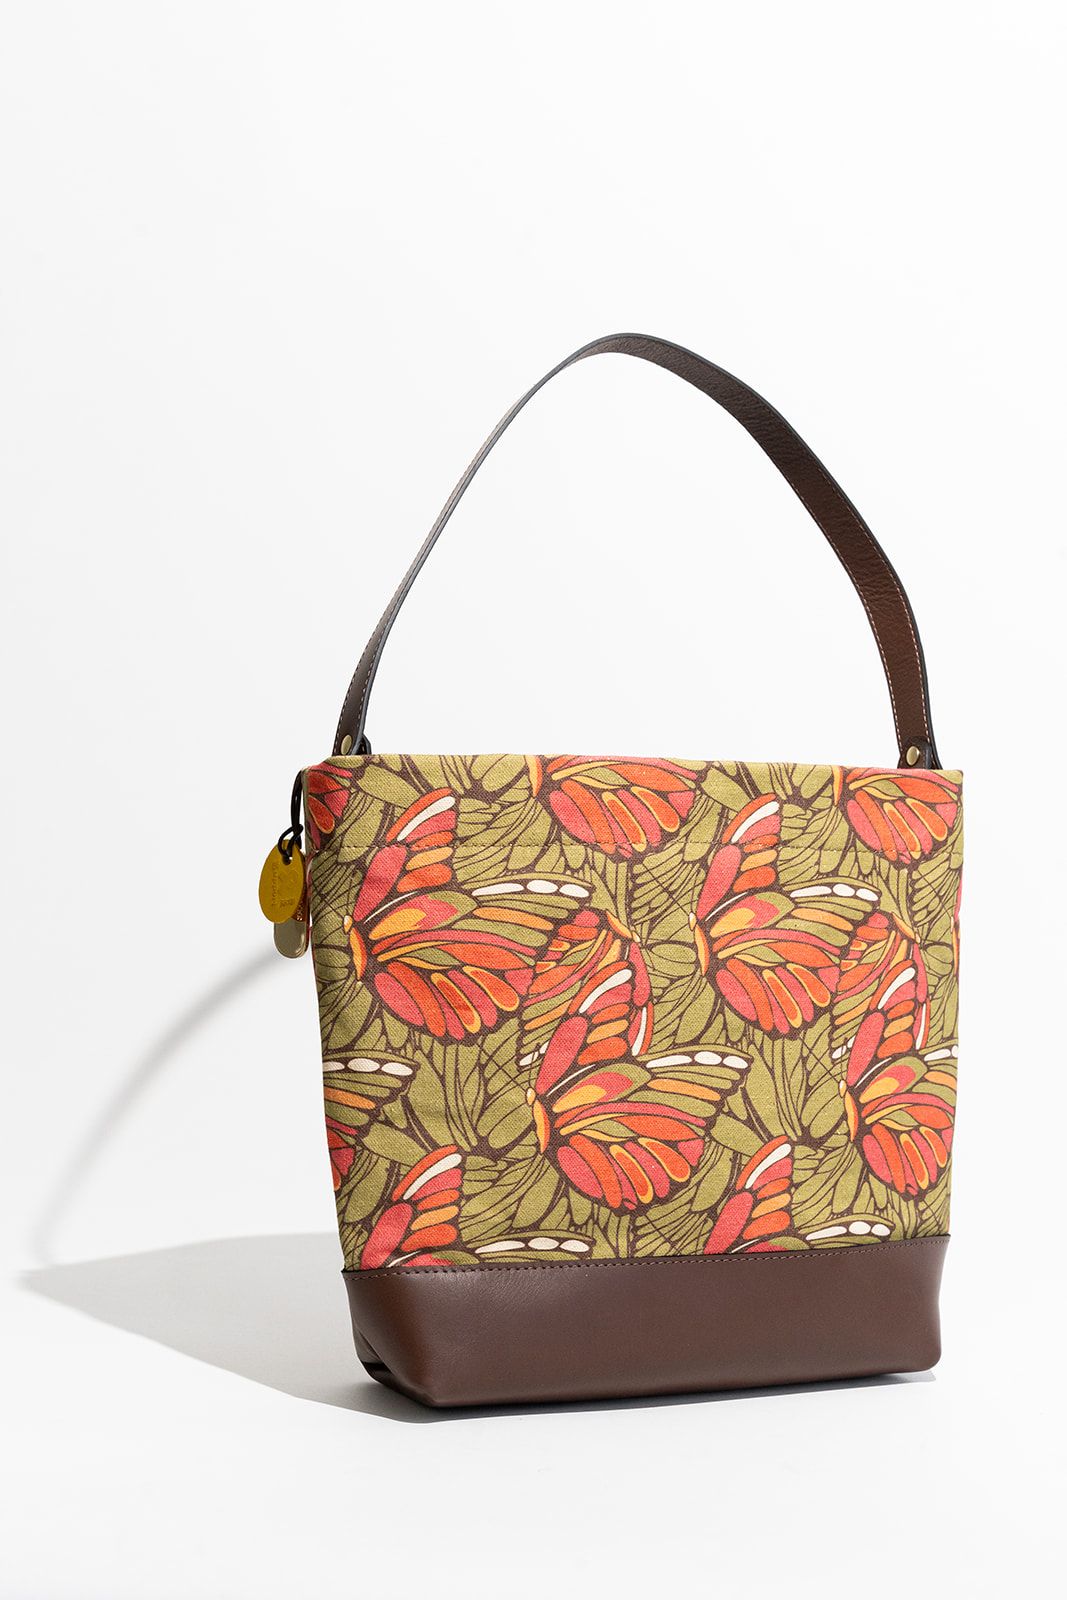 Sophia | Butterfly Print + Brown Leather